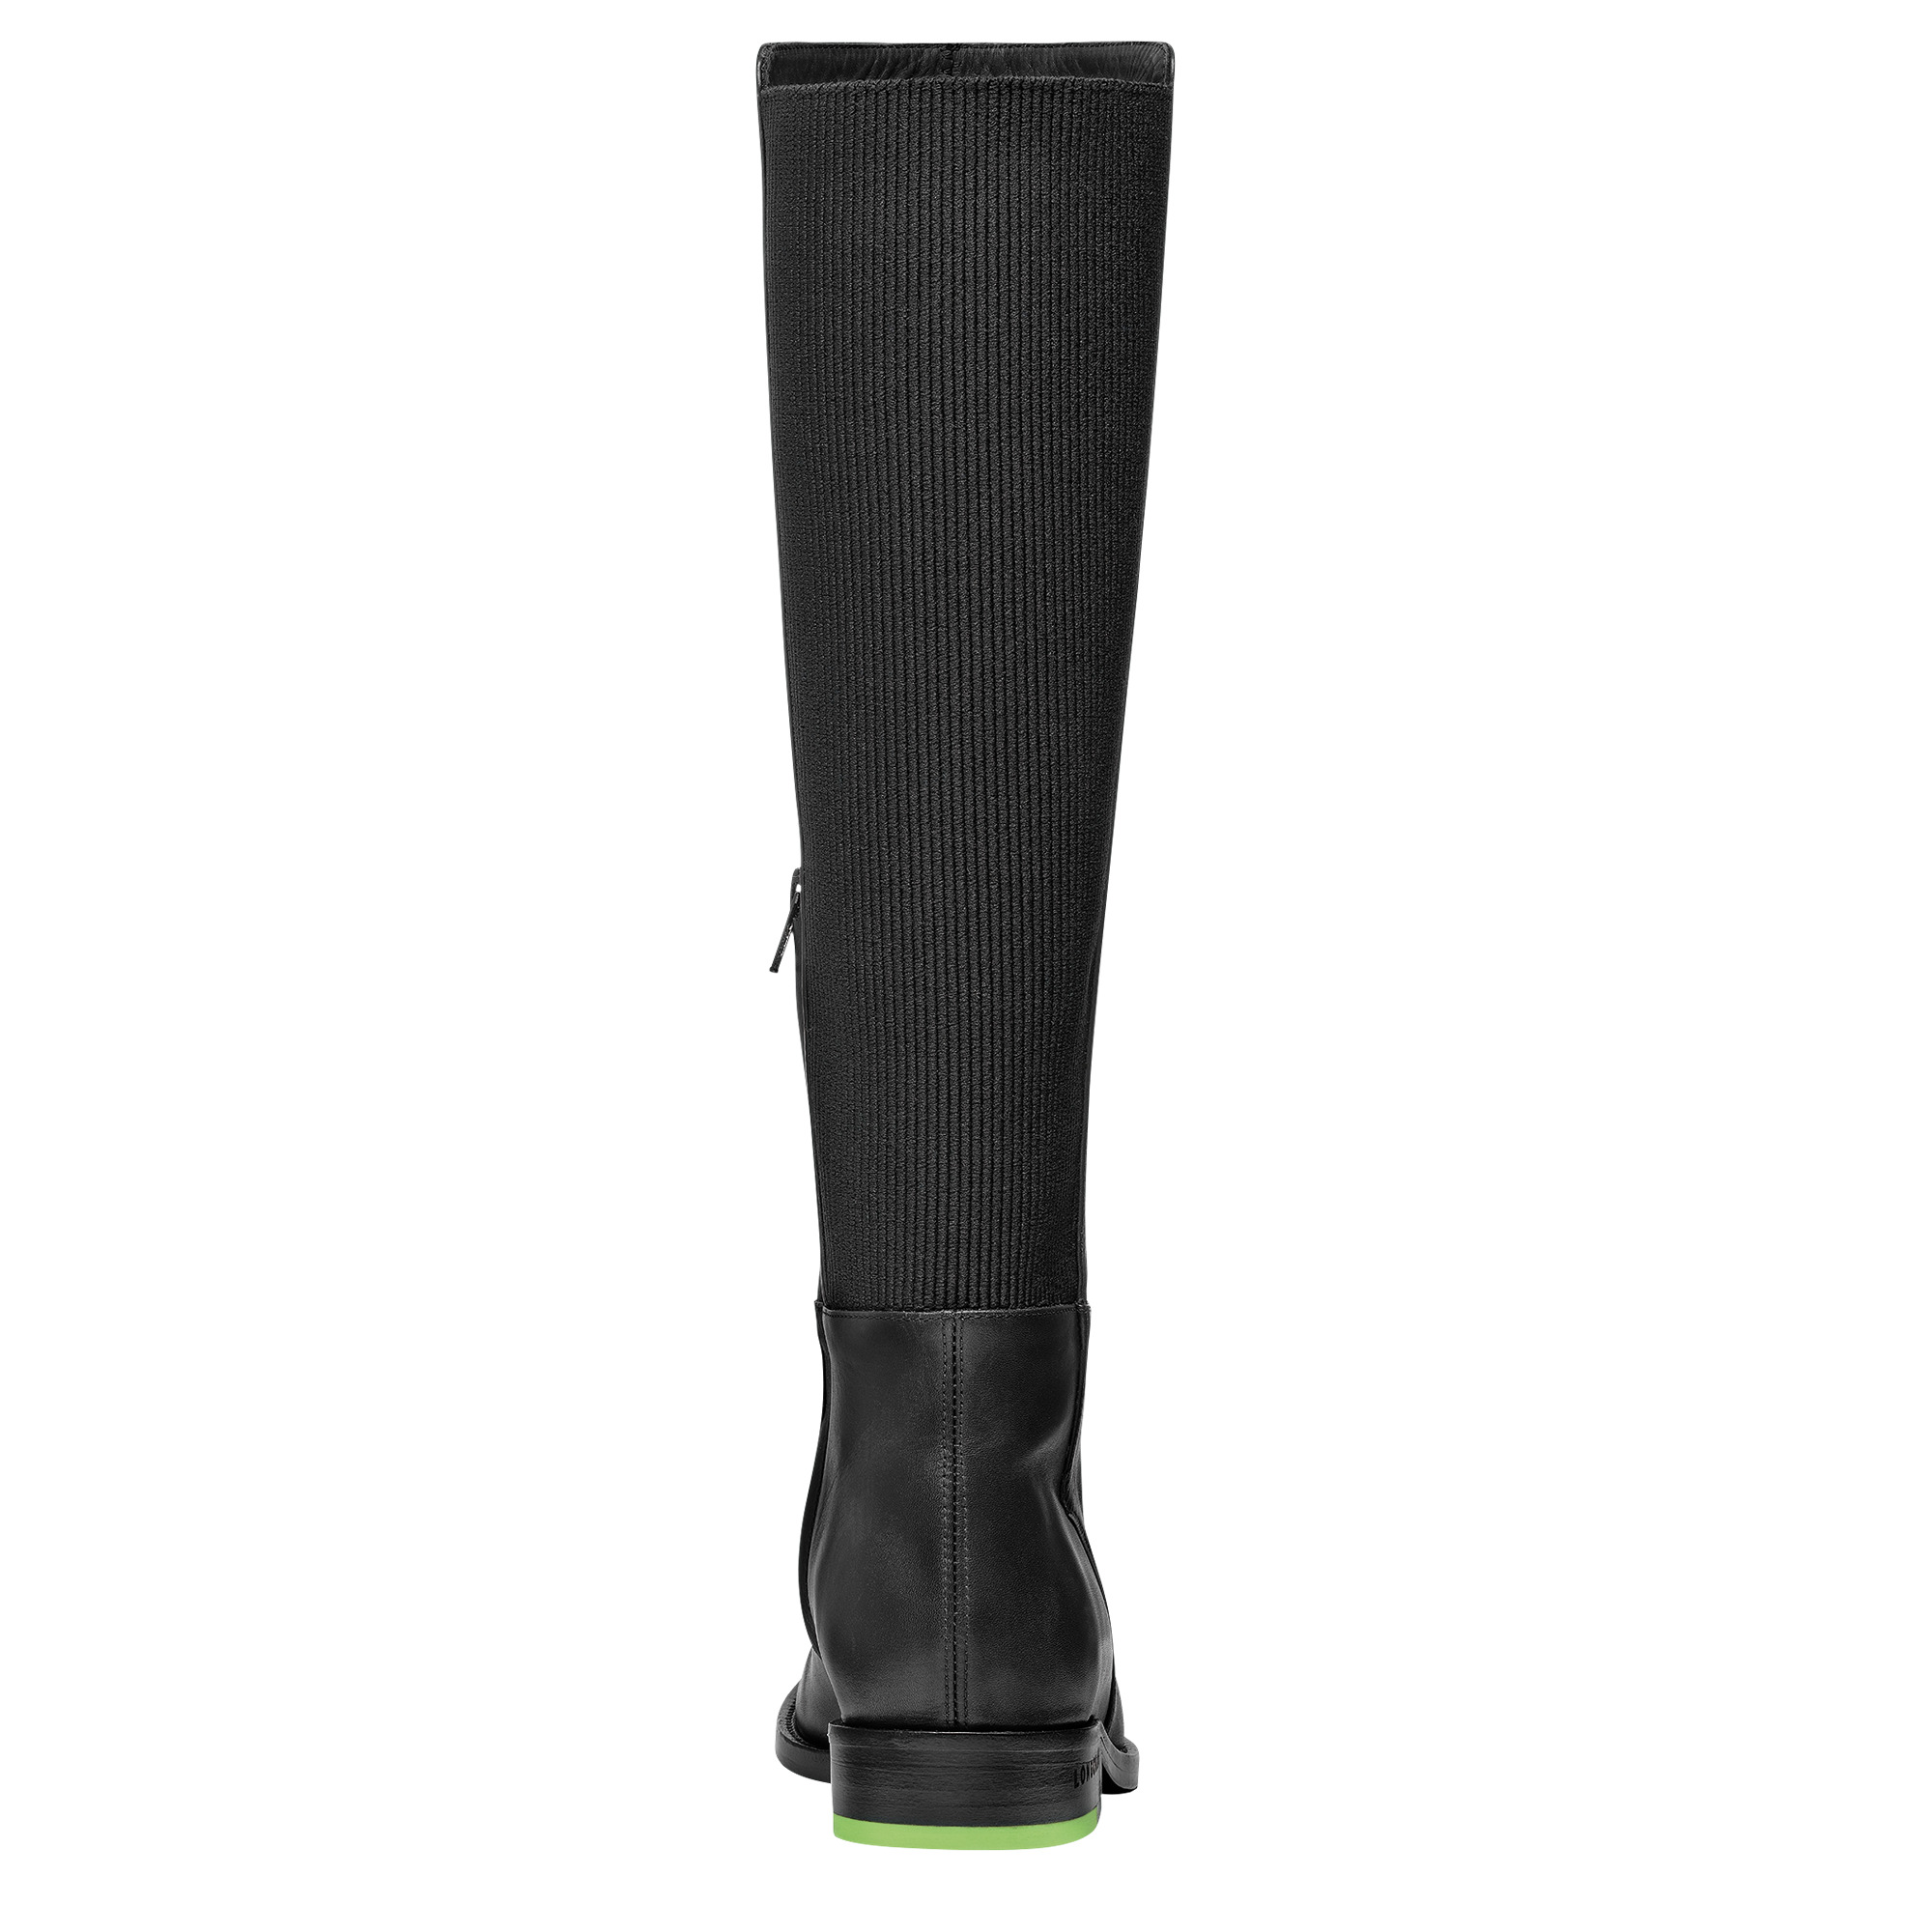 Box-trot Riding boots Black - Leather - 3